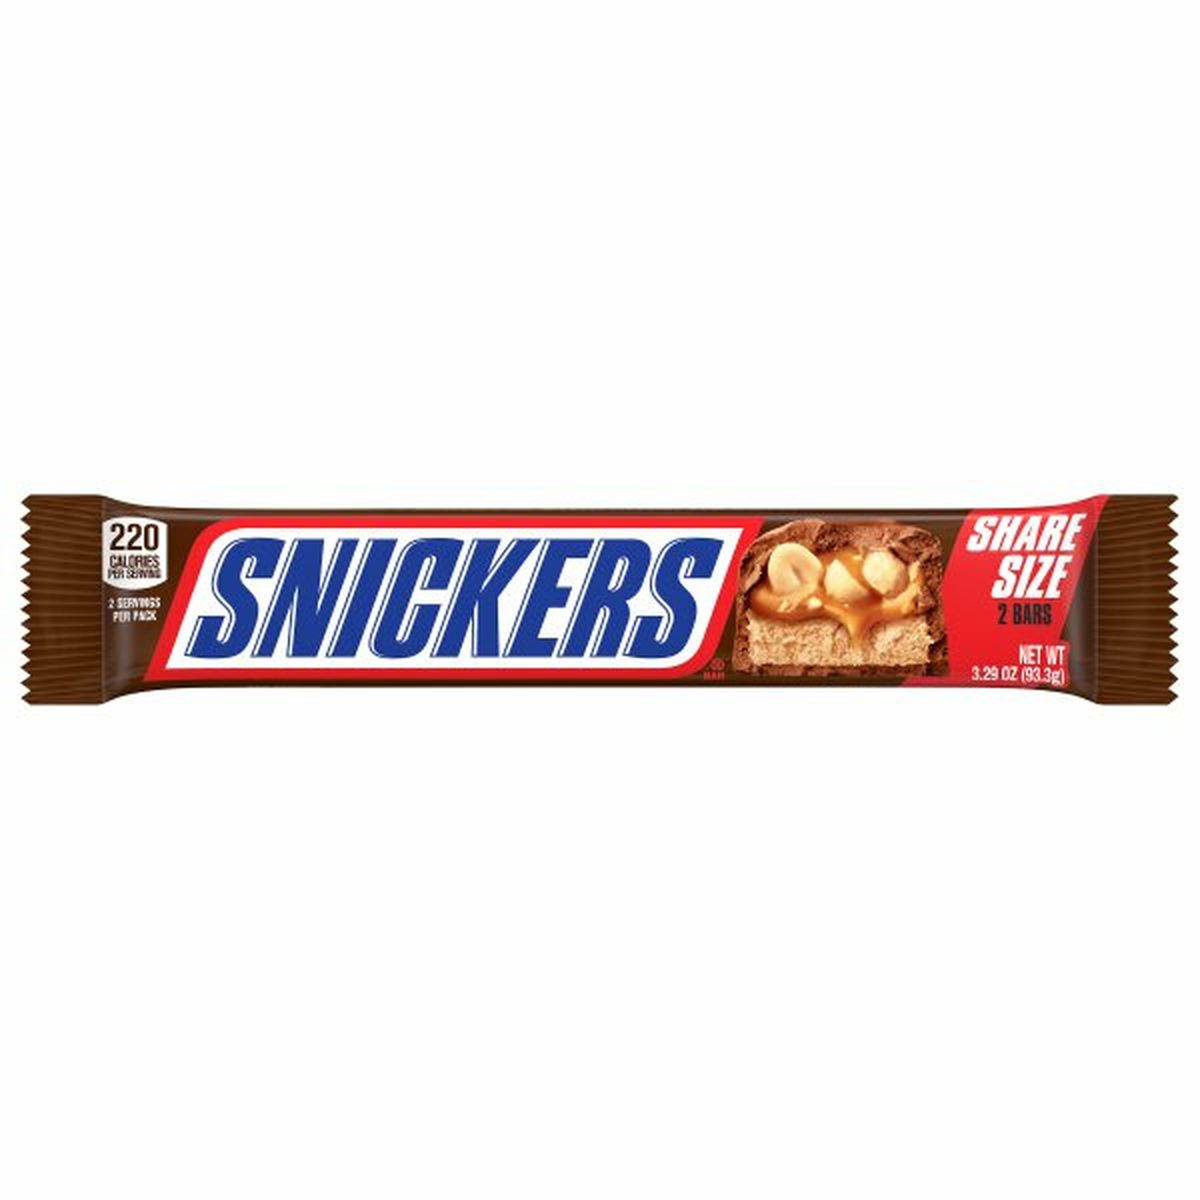 Calories in Snickers Bars